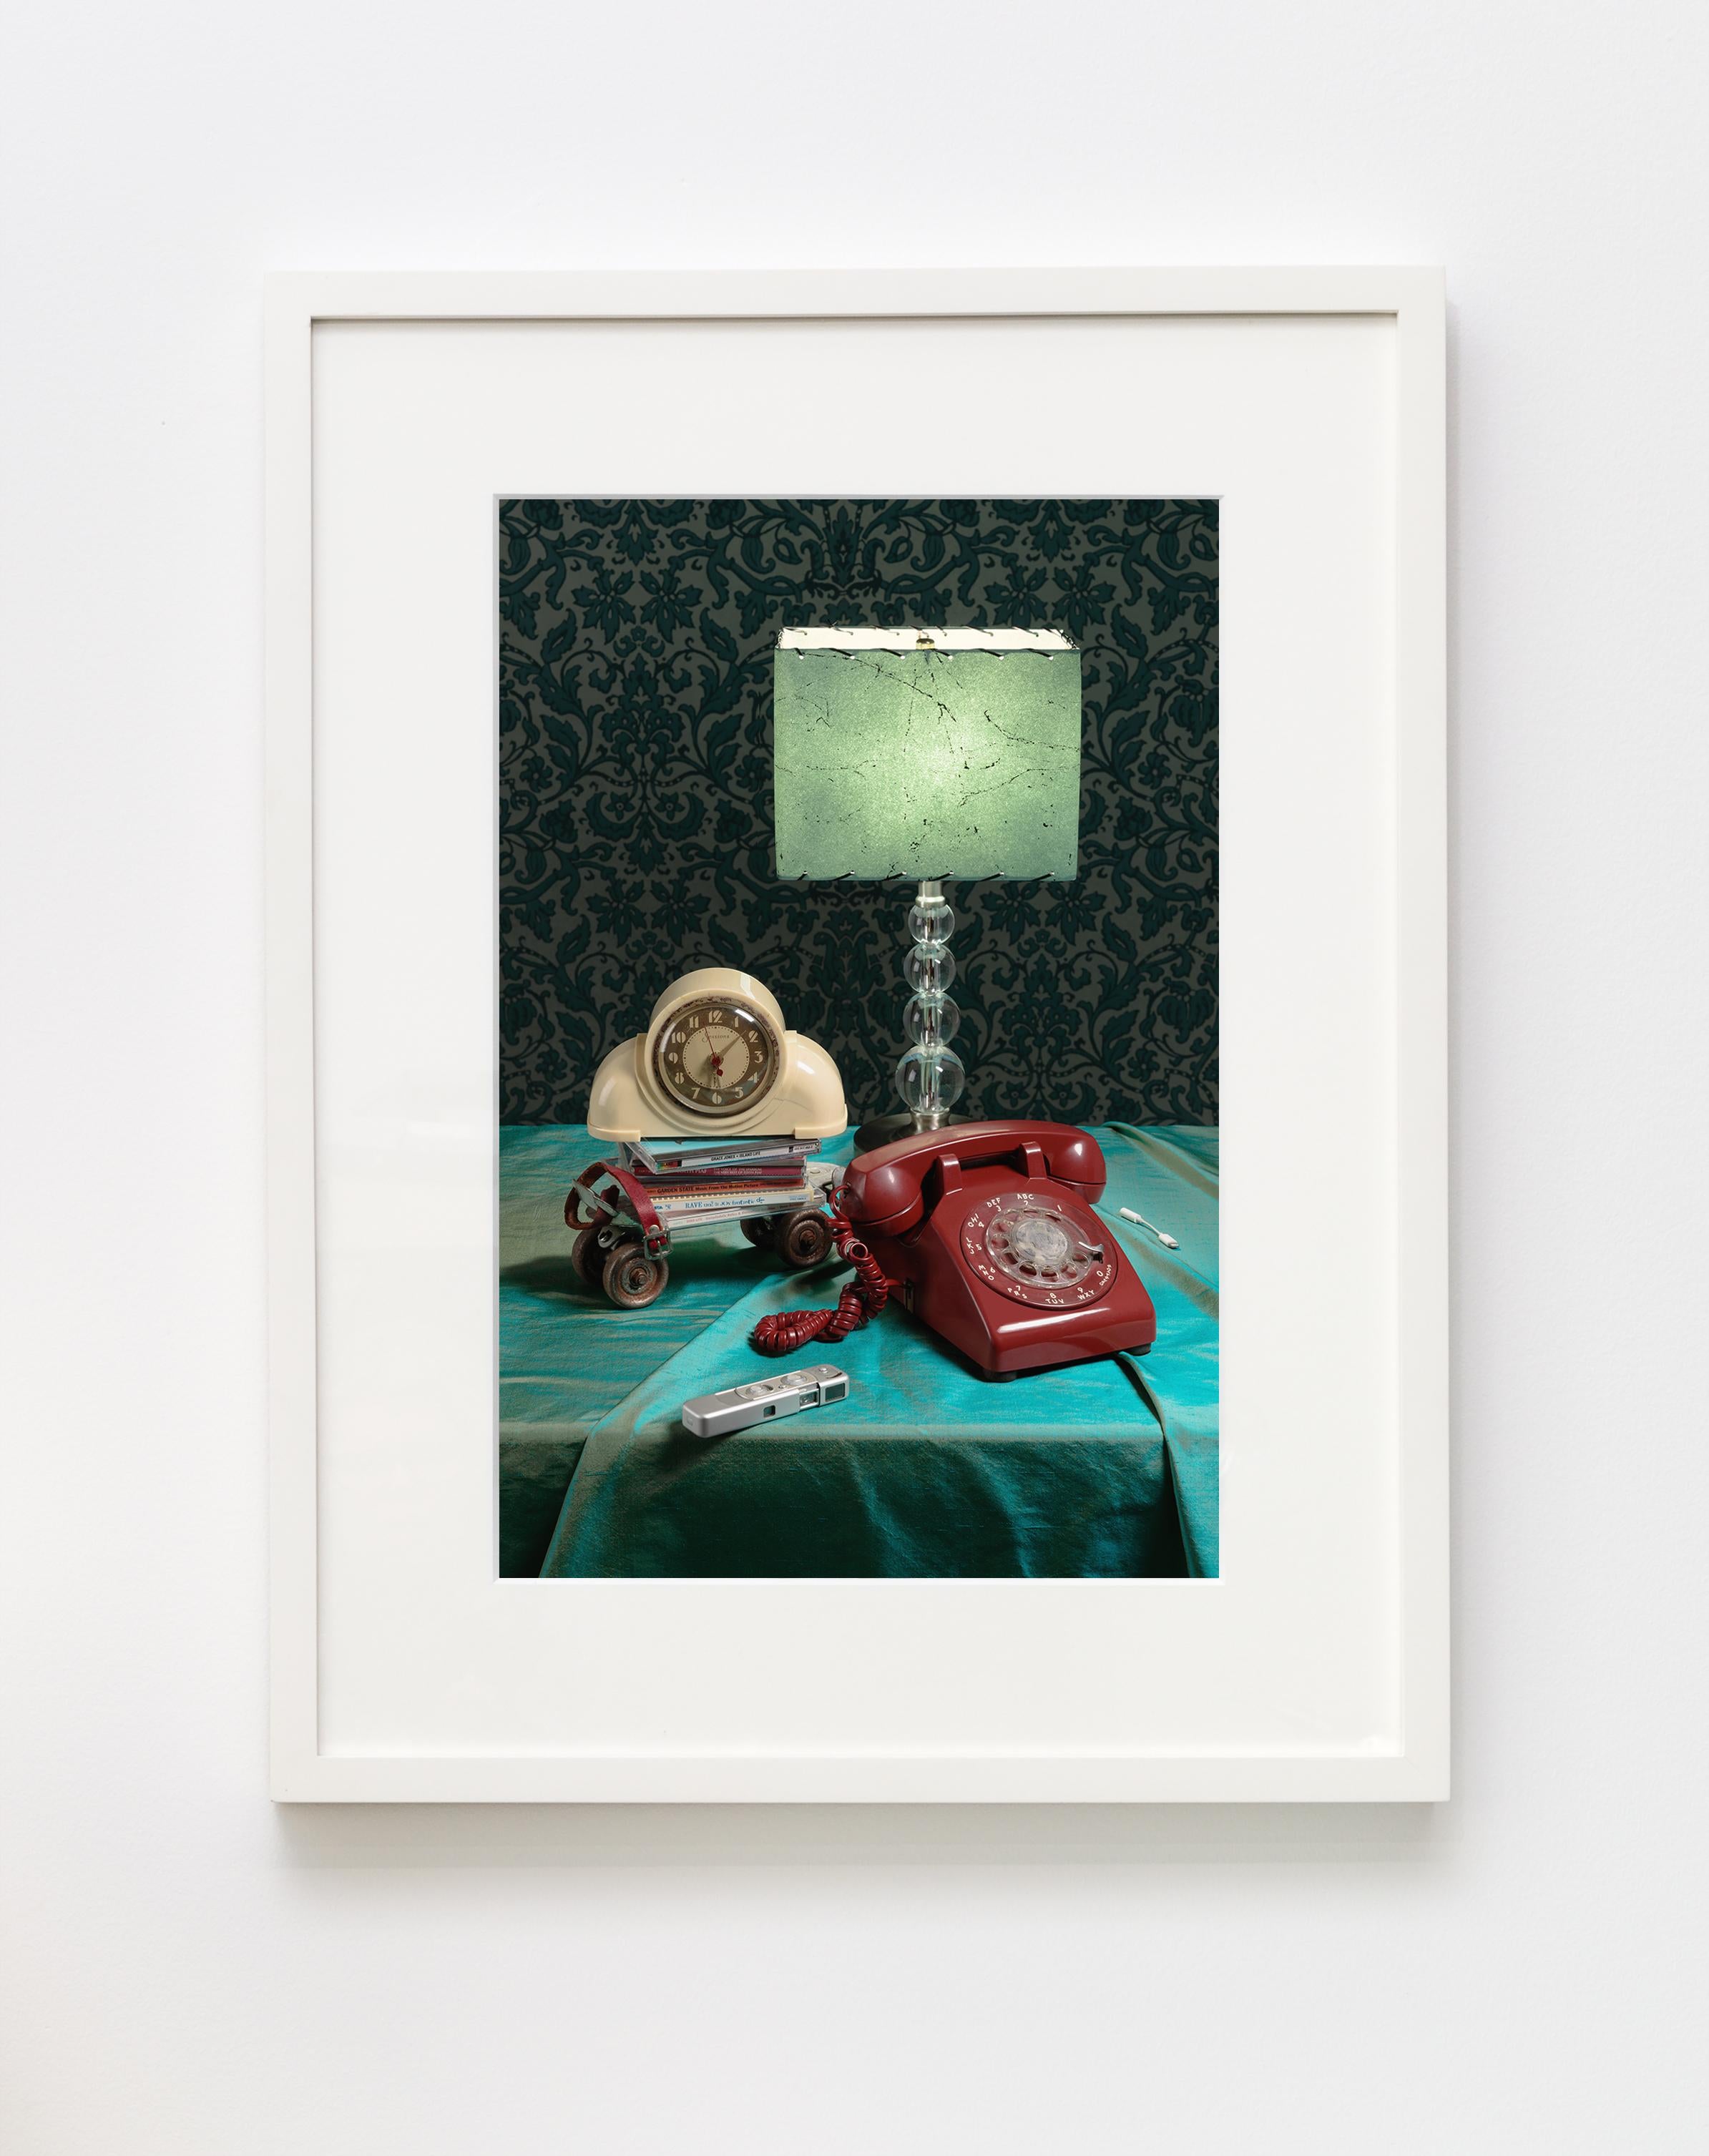 “Still Life with Spy Camera” Contemporary Still-life Photo with Art Deco Clock - Print by Jeanette May